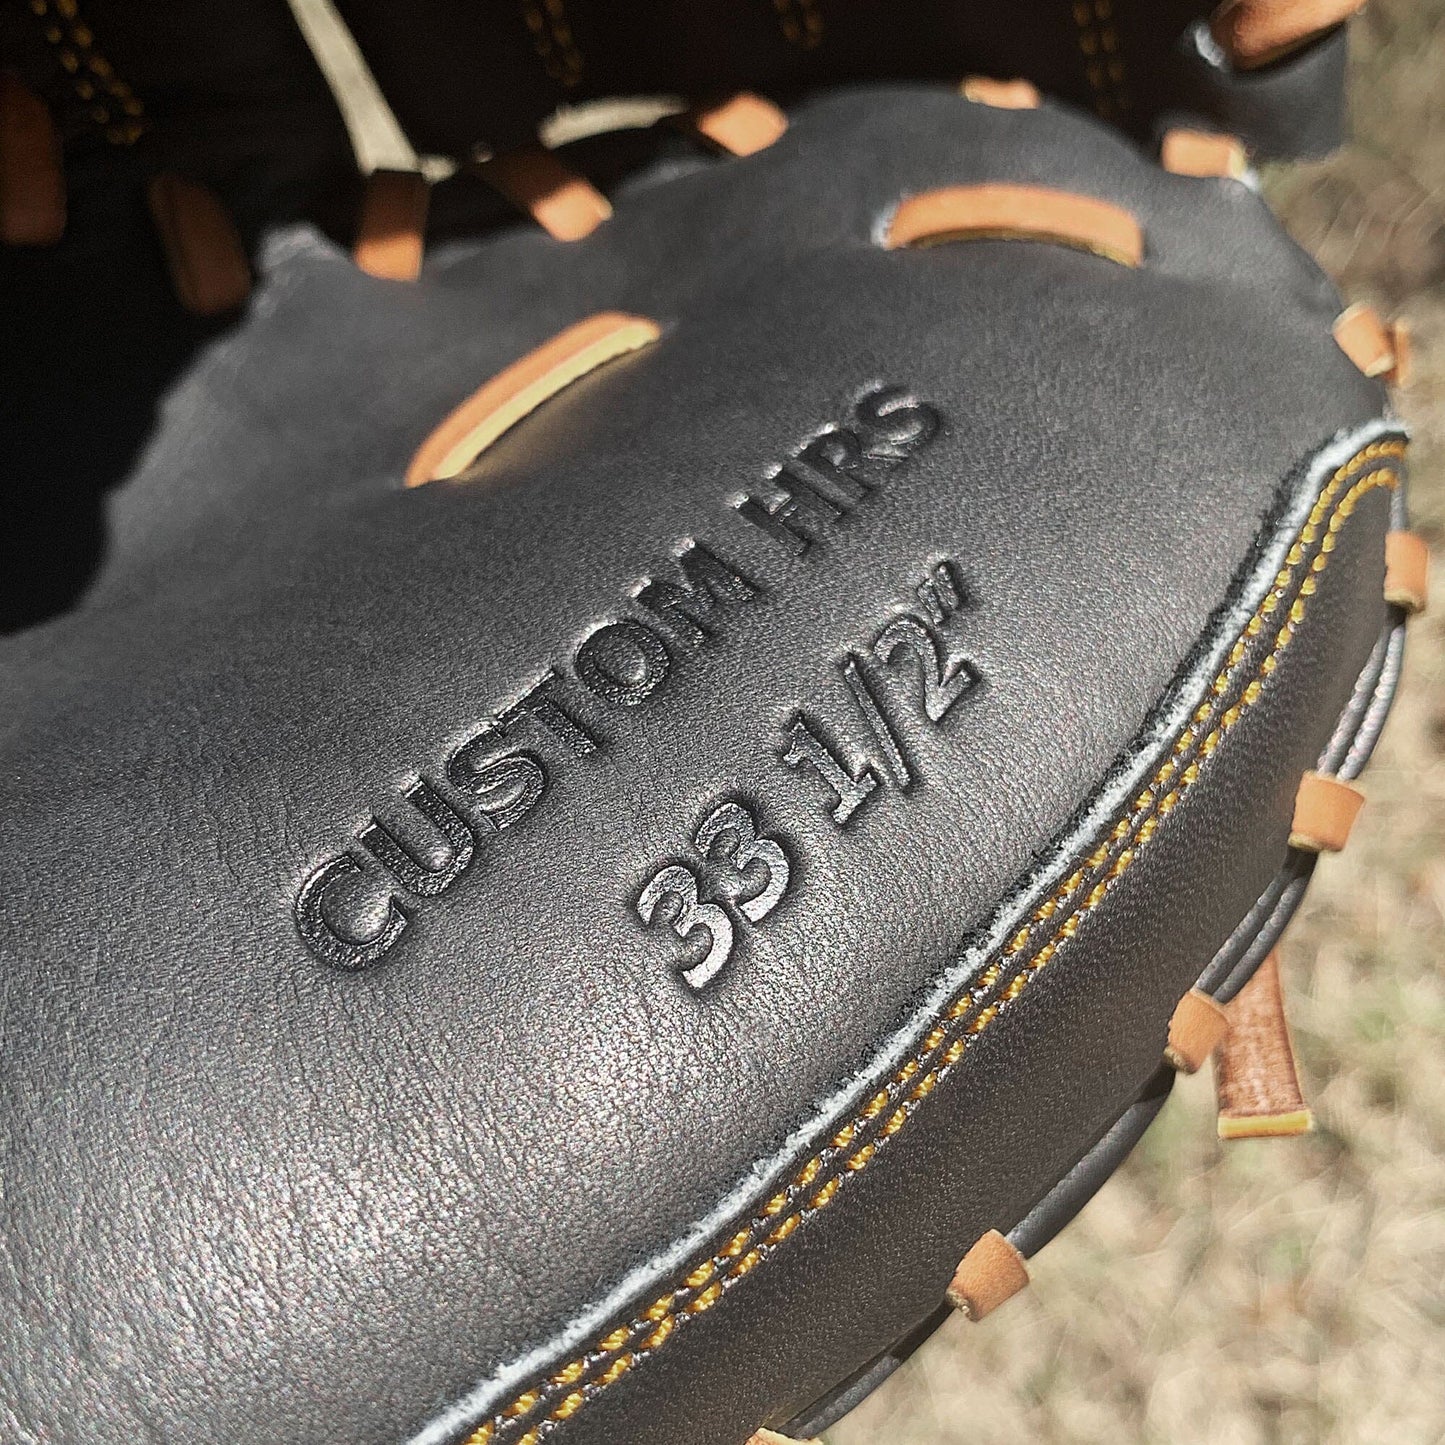 33.5" - Baseball Catcher's Mitt - Black with Tan Laces